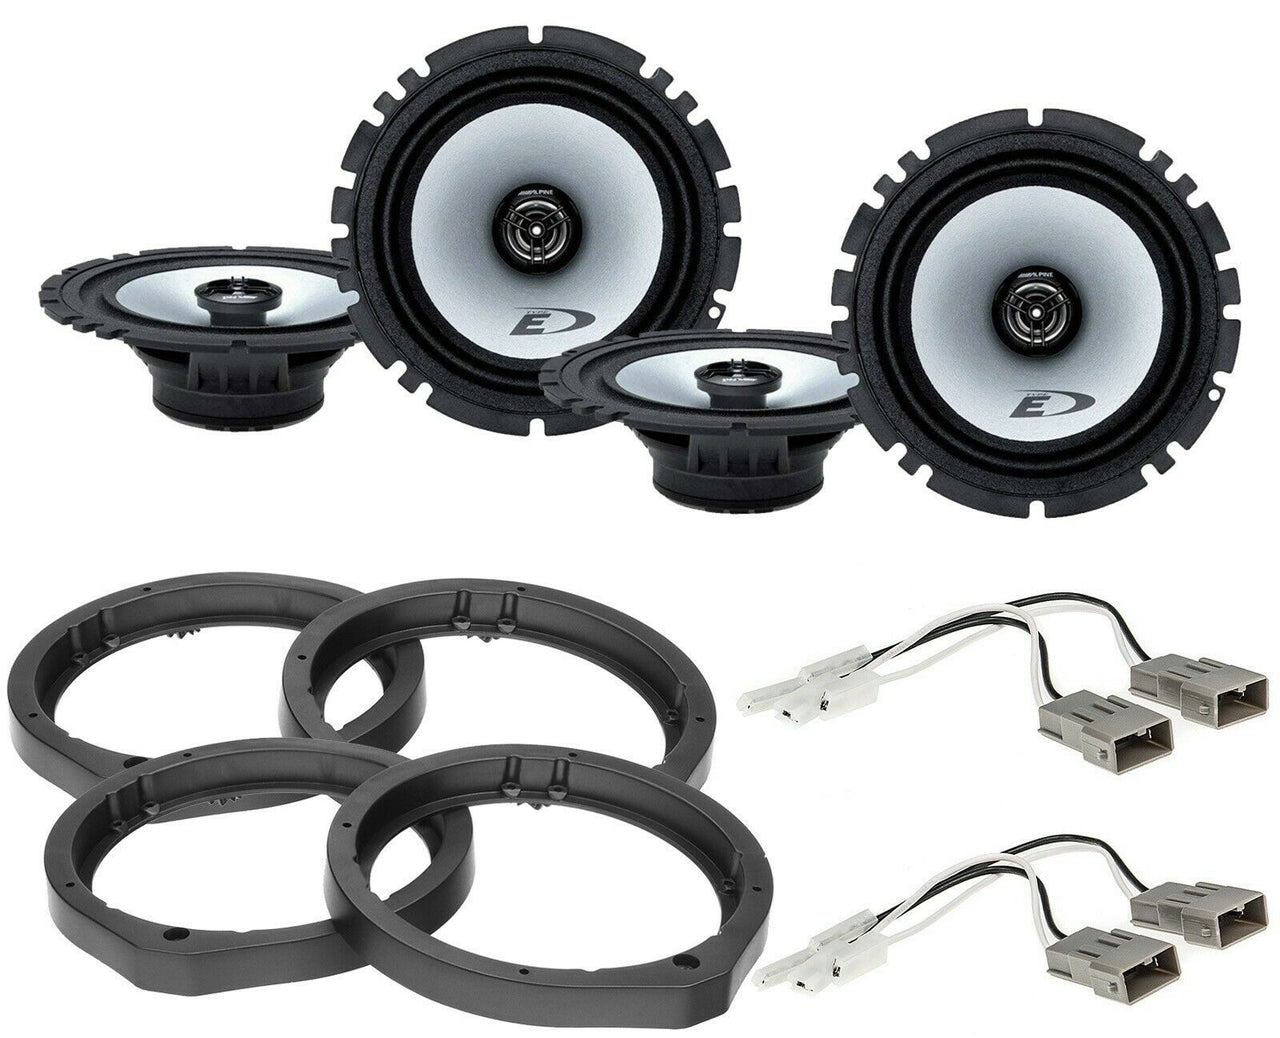 2 Alpine SXE-1726S + Front & Rear Speaker Adapters + Harness For Select Honda and Acura Vehicles